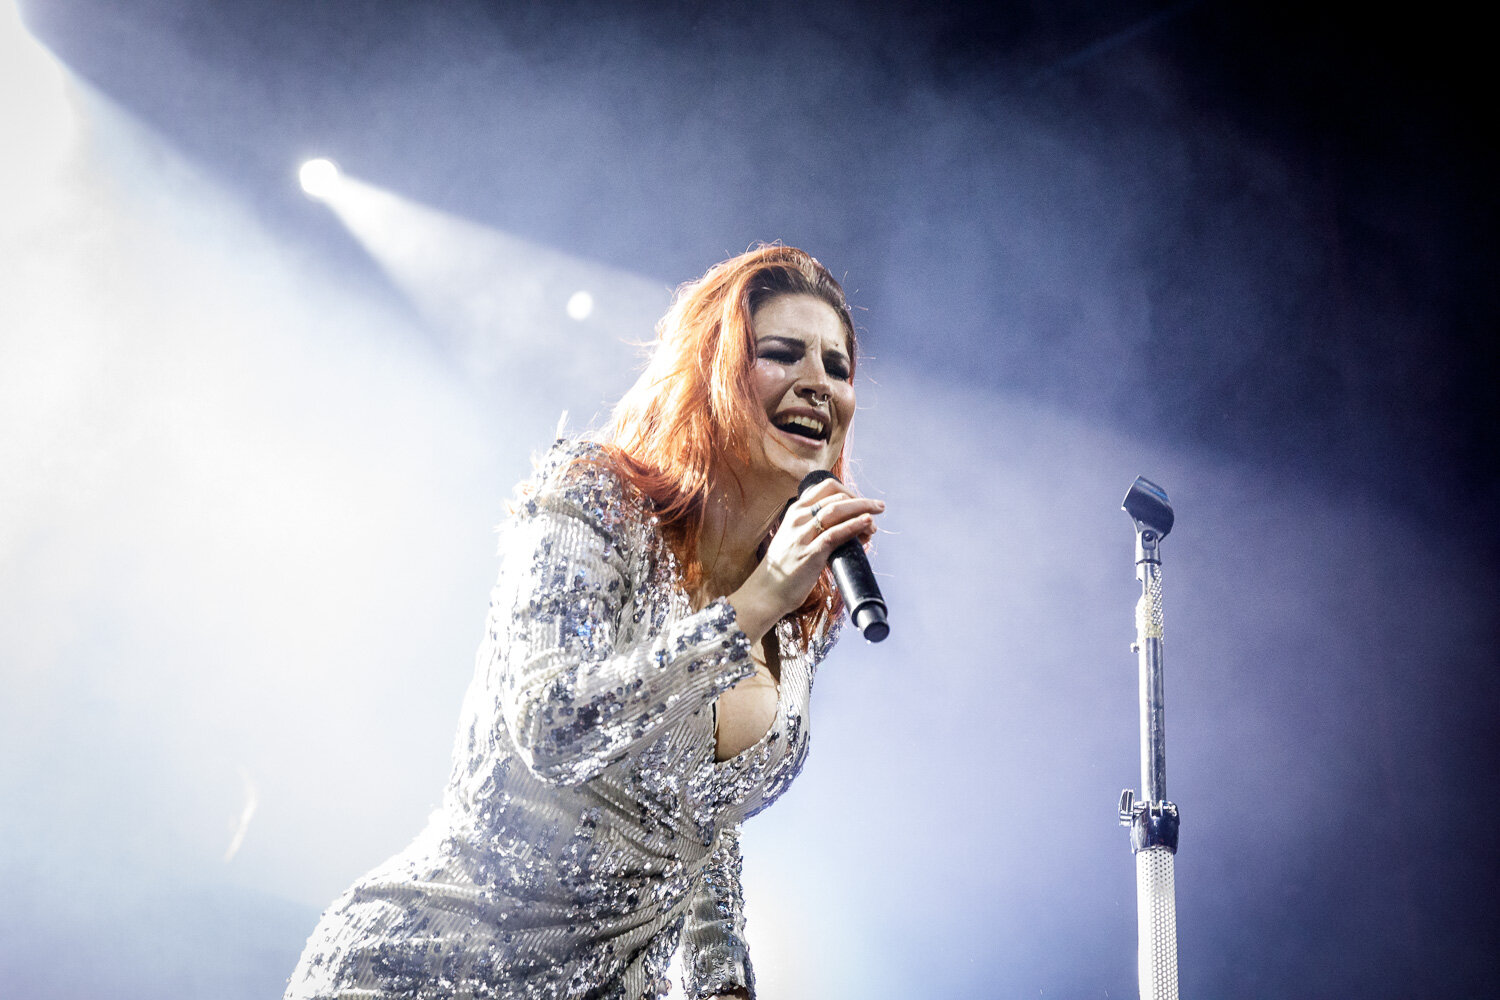 Delain at the O2 Ritz in Manchester on February 7th 2020